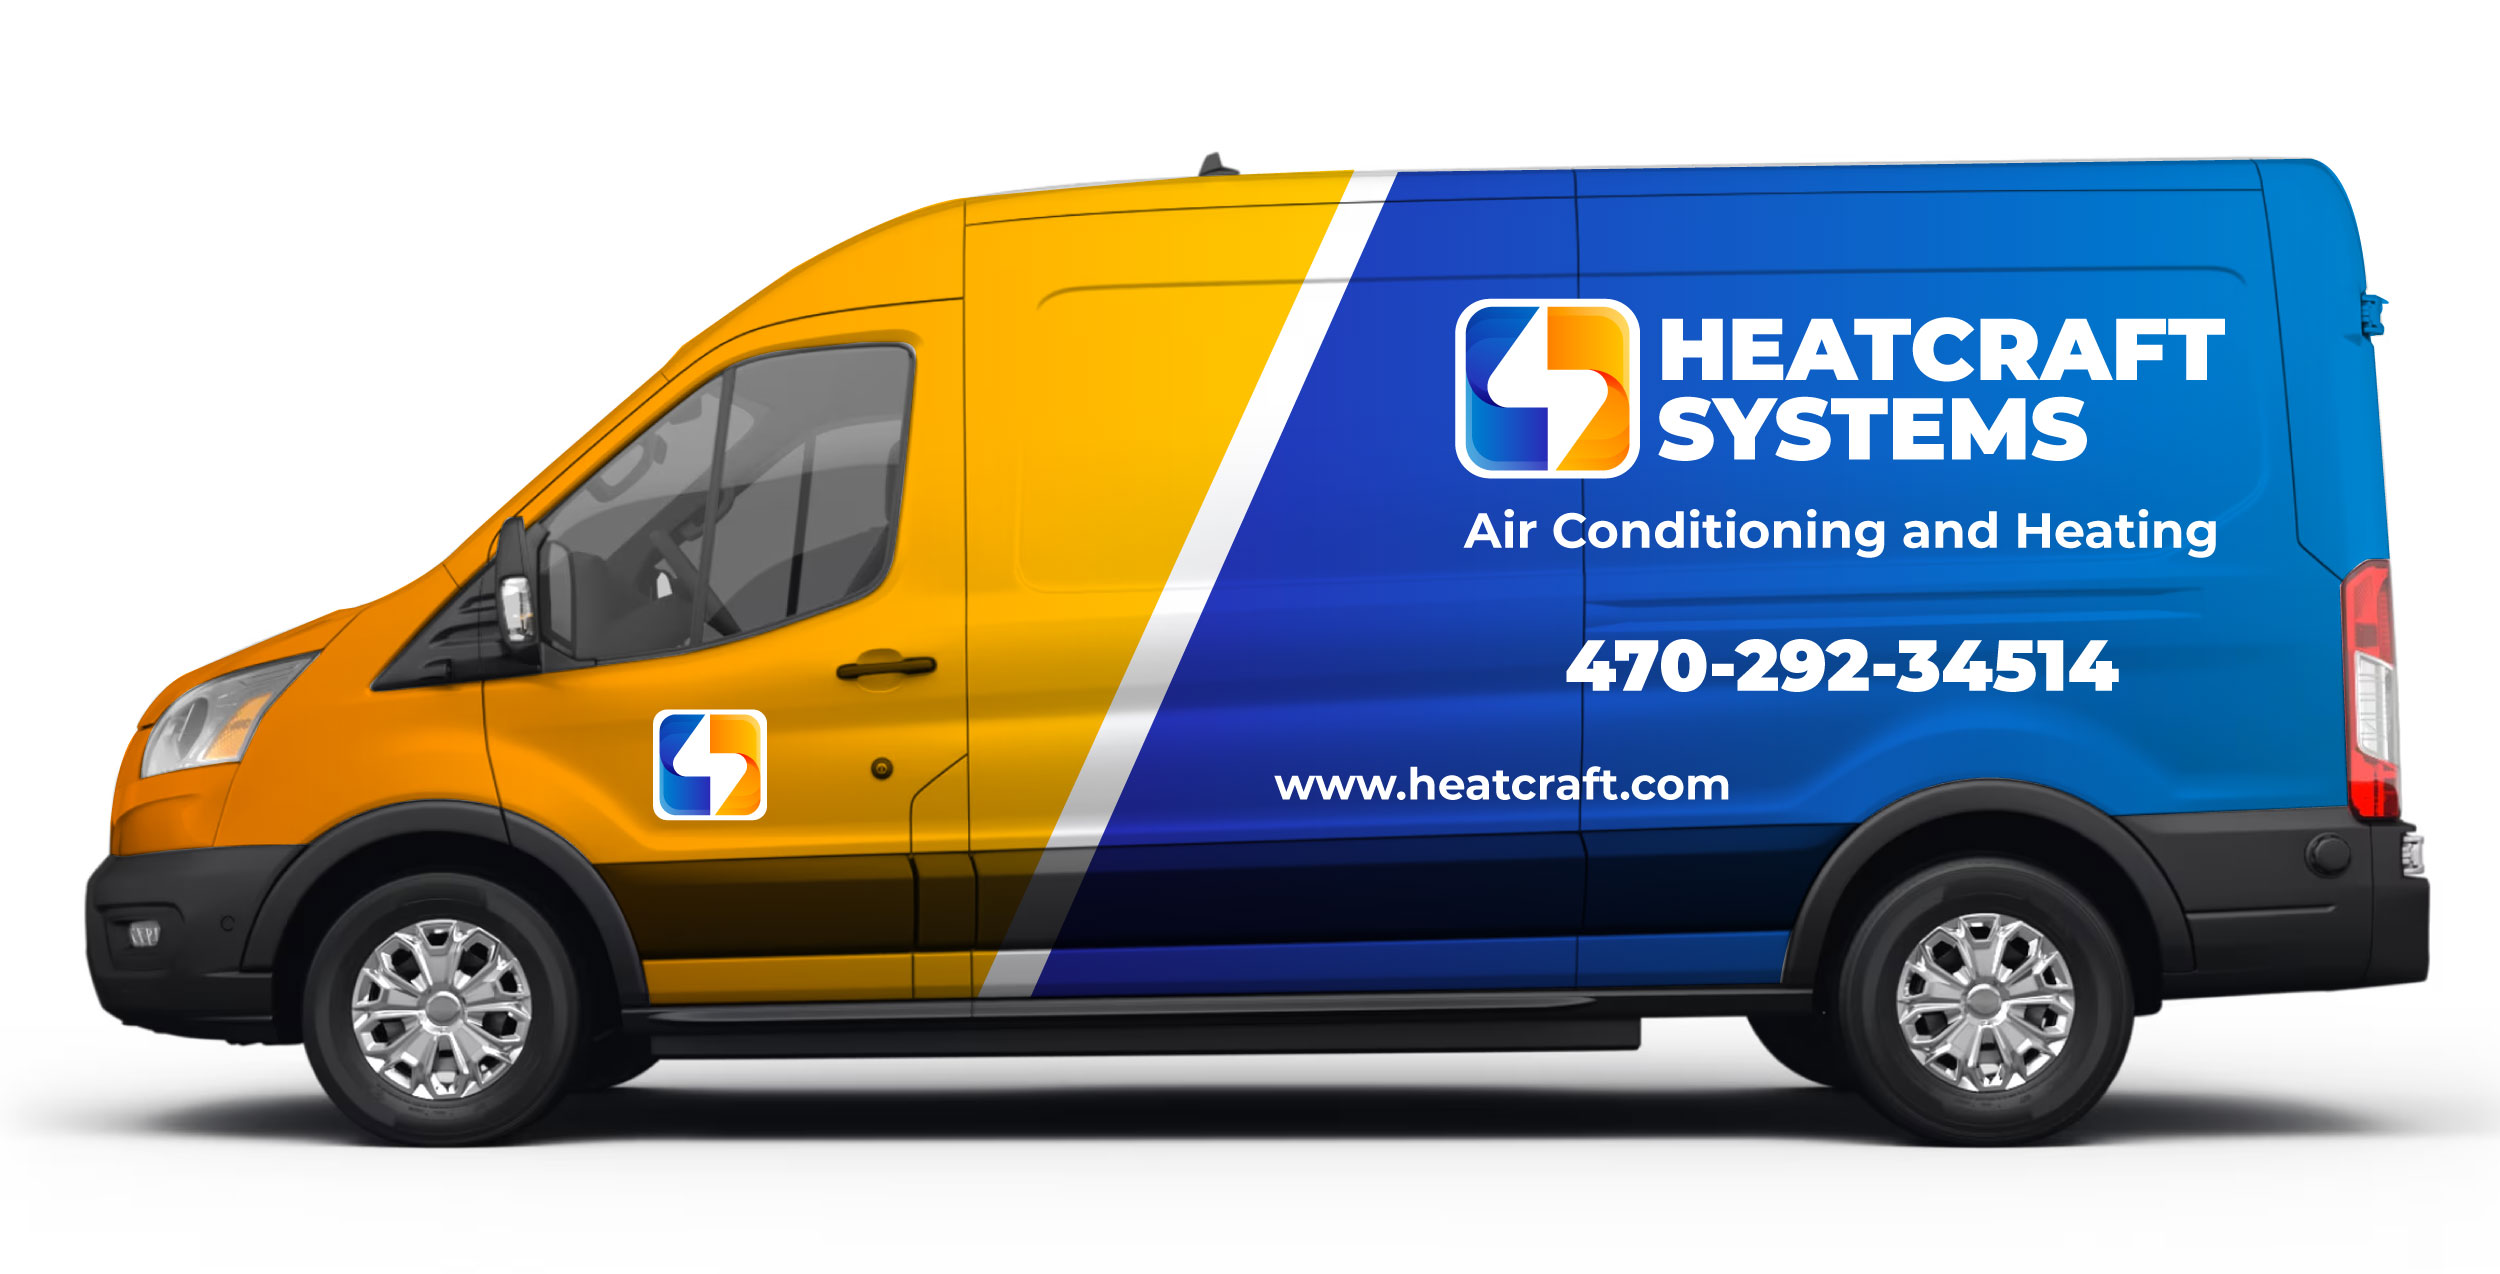 Full vehicle wrap featuring a vibrant and eye-catching design for. The background is a deep blue and yellow with the company logo prominently displayed on the sides and back. Imagery includes HVAC equipment to showcase the range of services provided. Contact information, including phone number and website, is prominently displayed for easy customer reach.